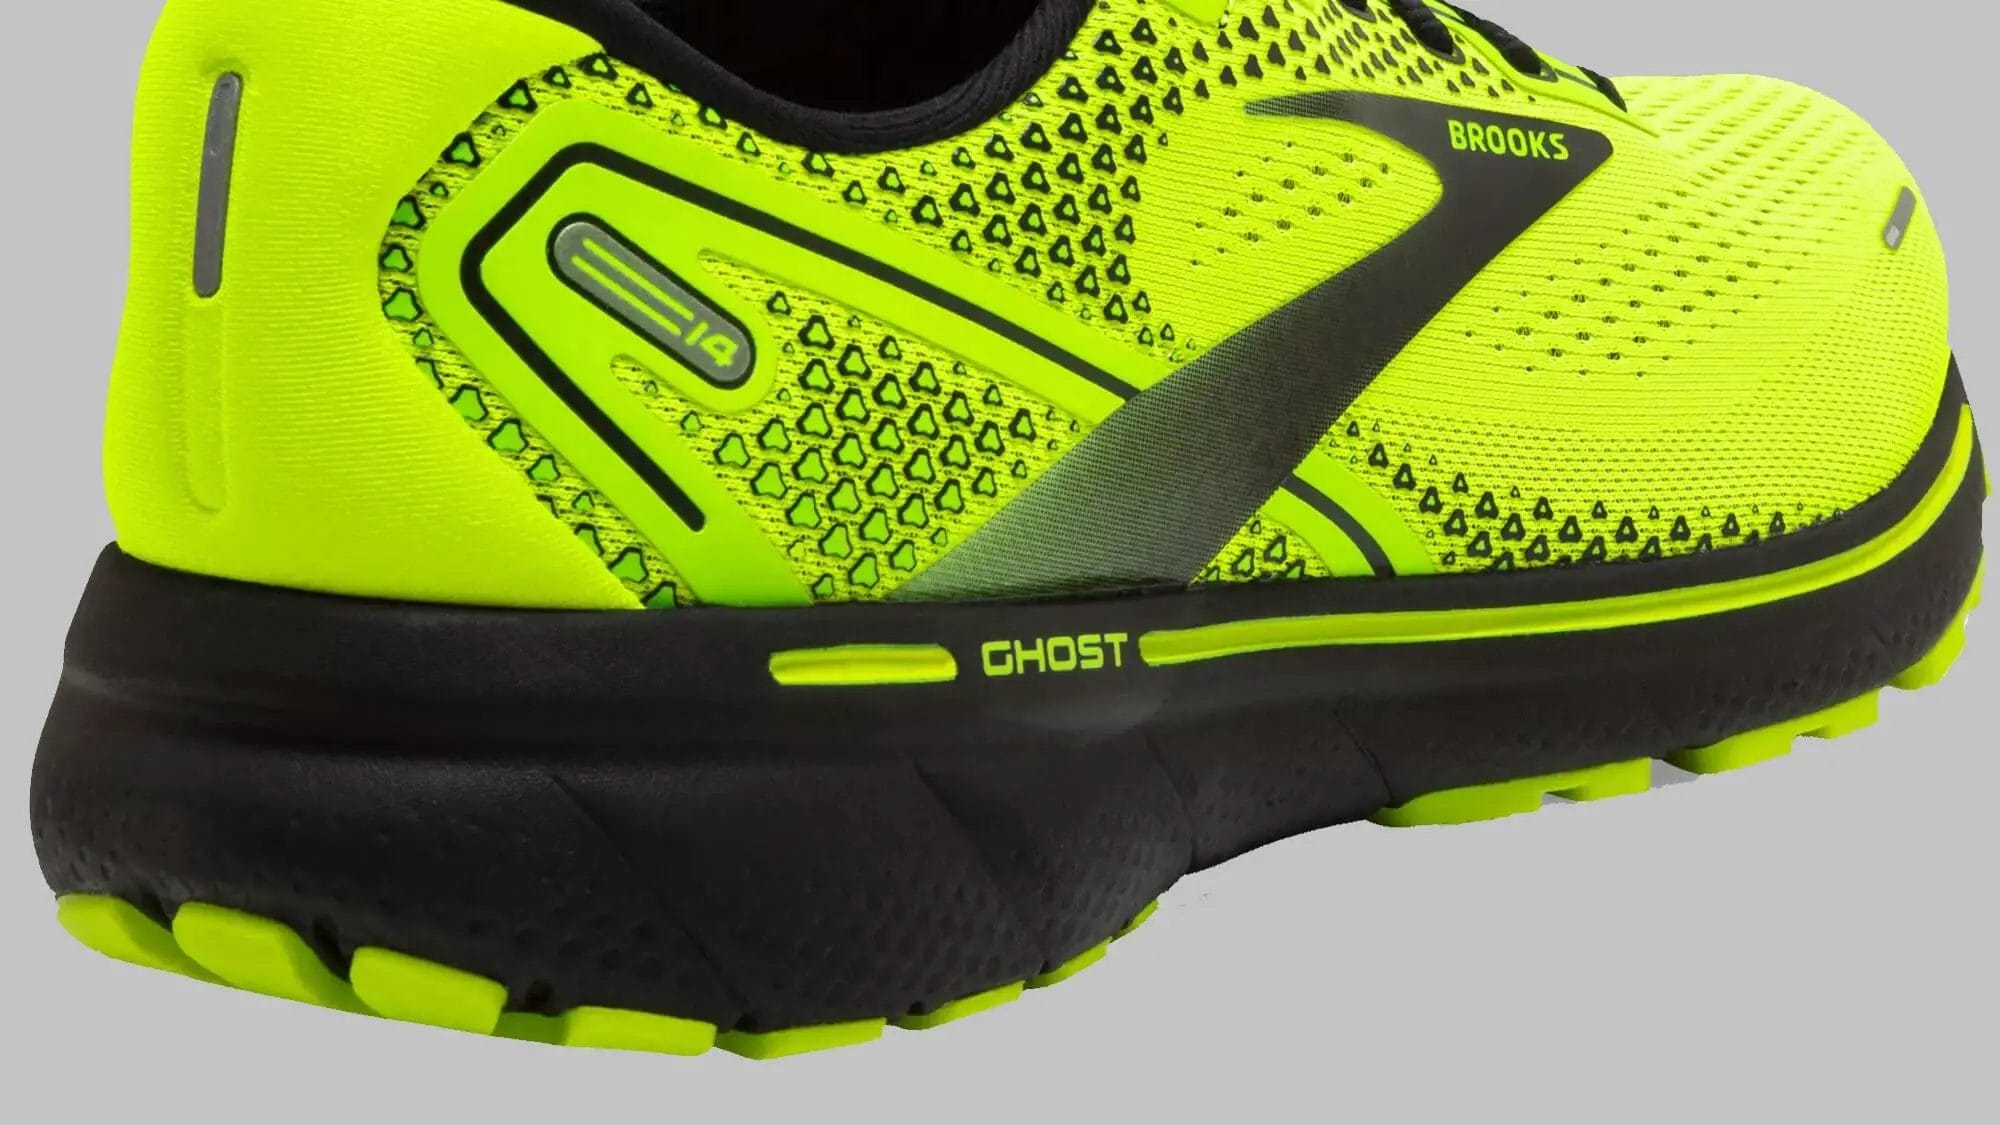 Close up view of the heel crash pad on the Brooks Ghost 14